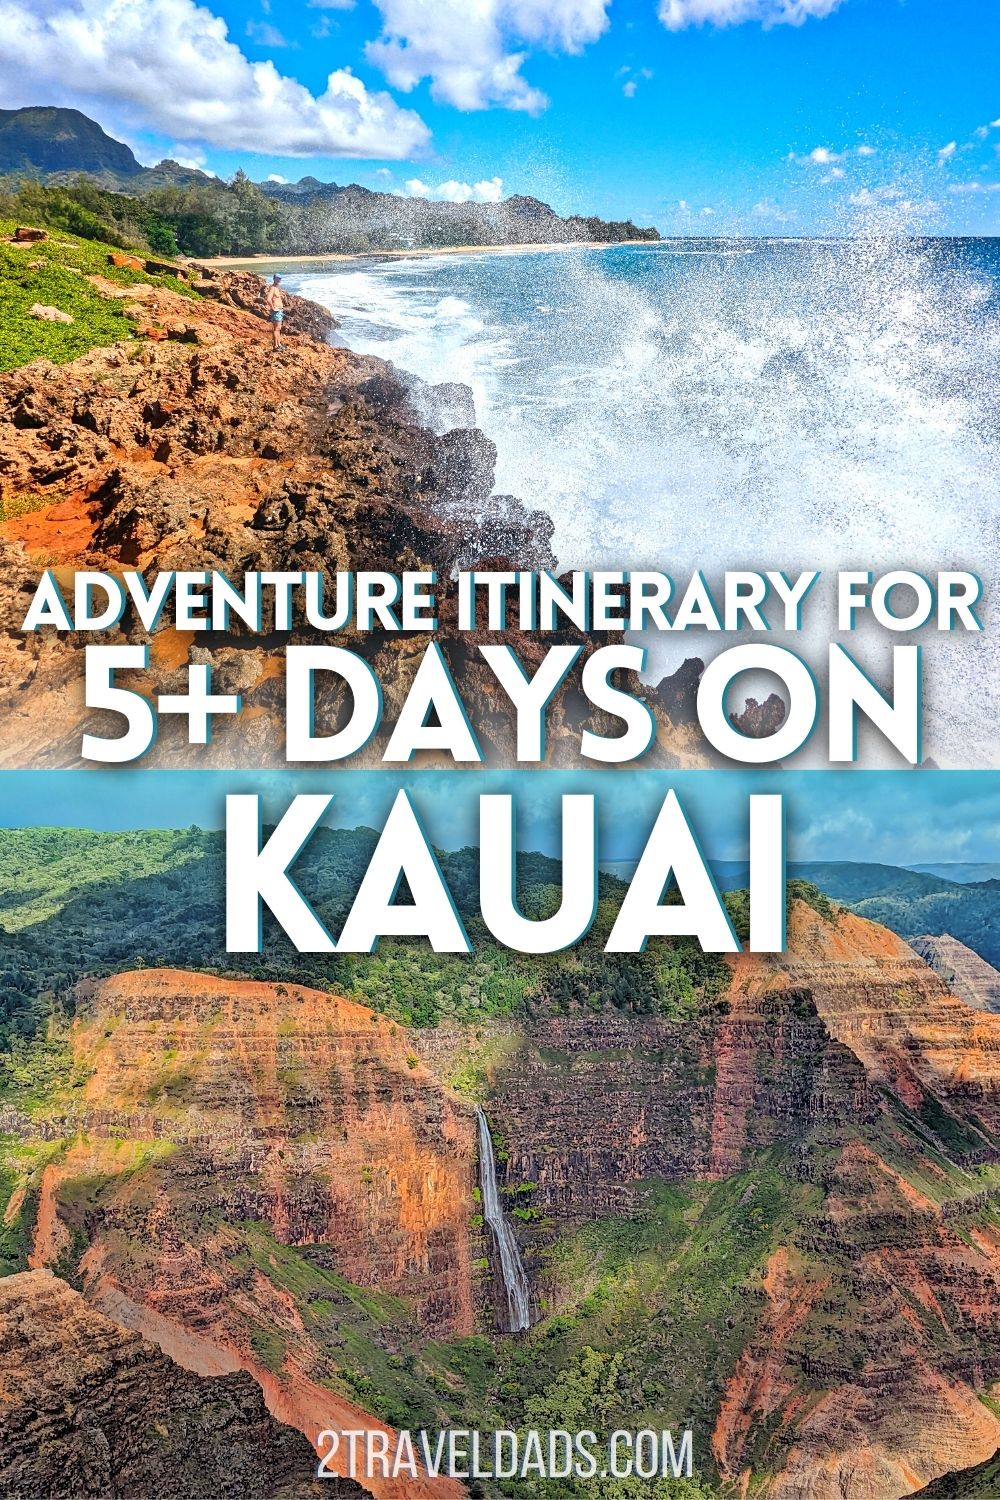 Kauai itinerary for five or more days on the Garden Island. From the most beautiful views and hikes to relaxing on perfect beaches, this plan for a trip to Kauai is ideal for every level of traveler.